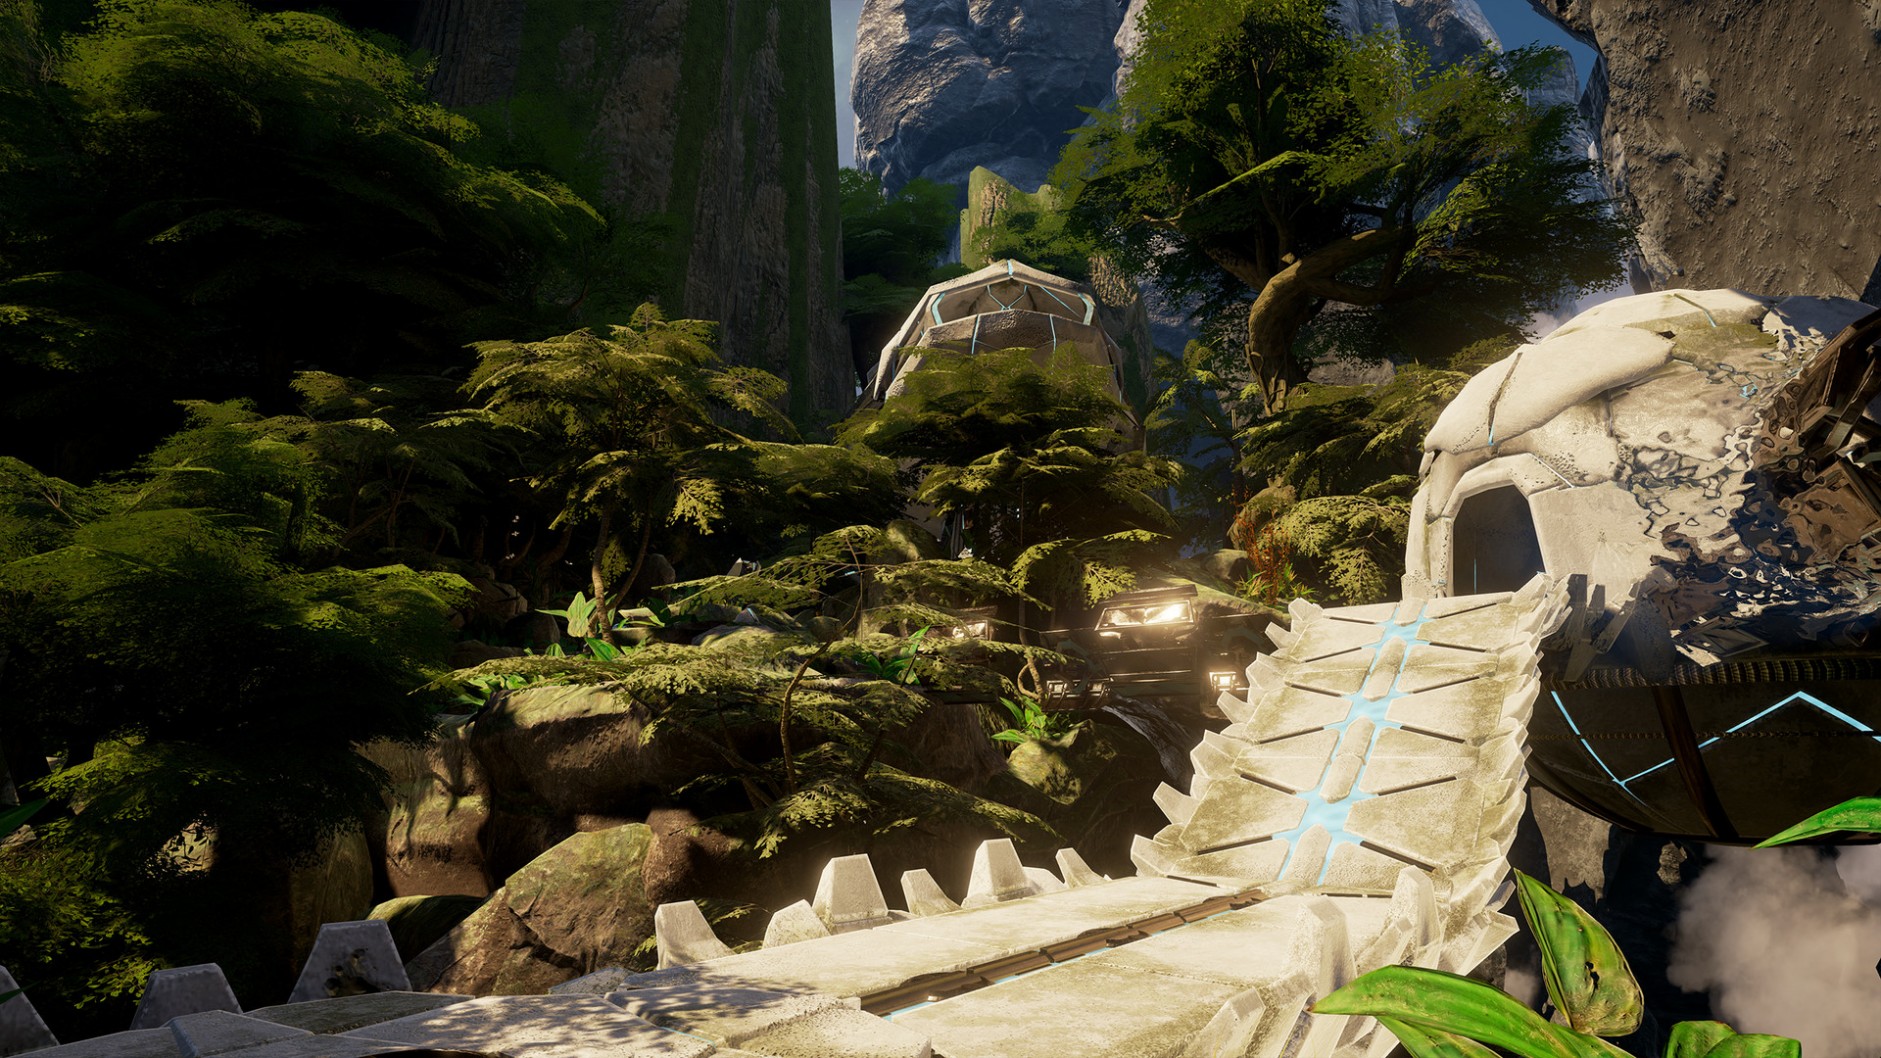 download obduction steam for free